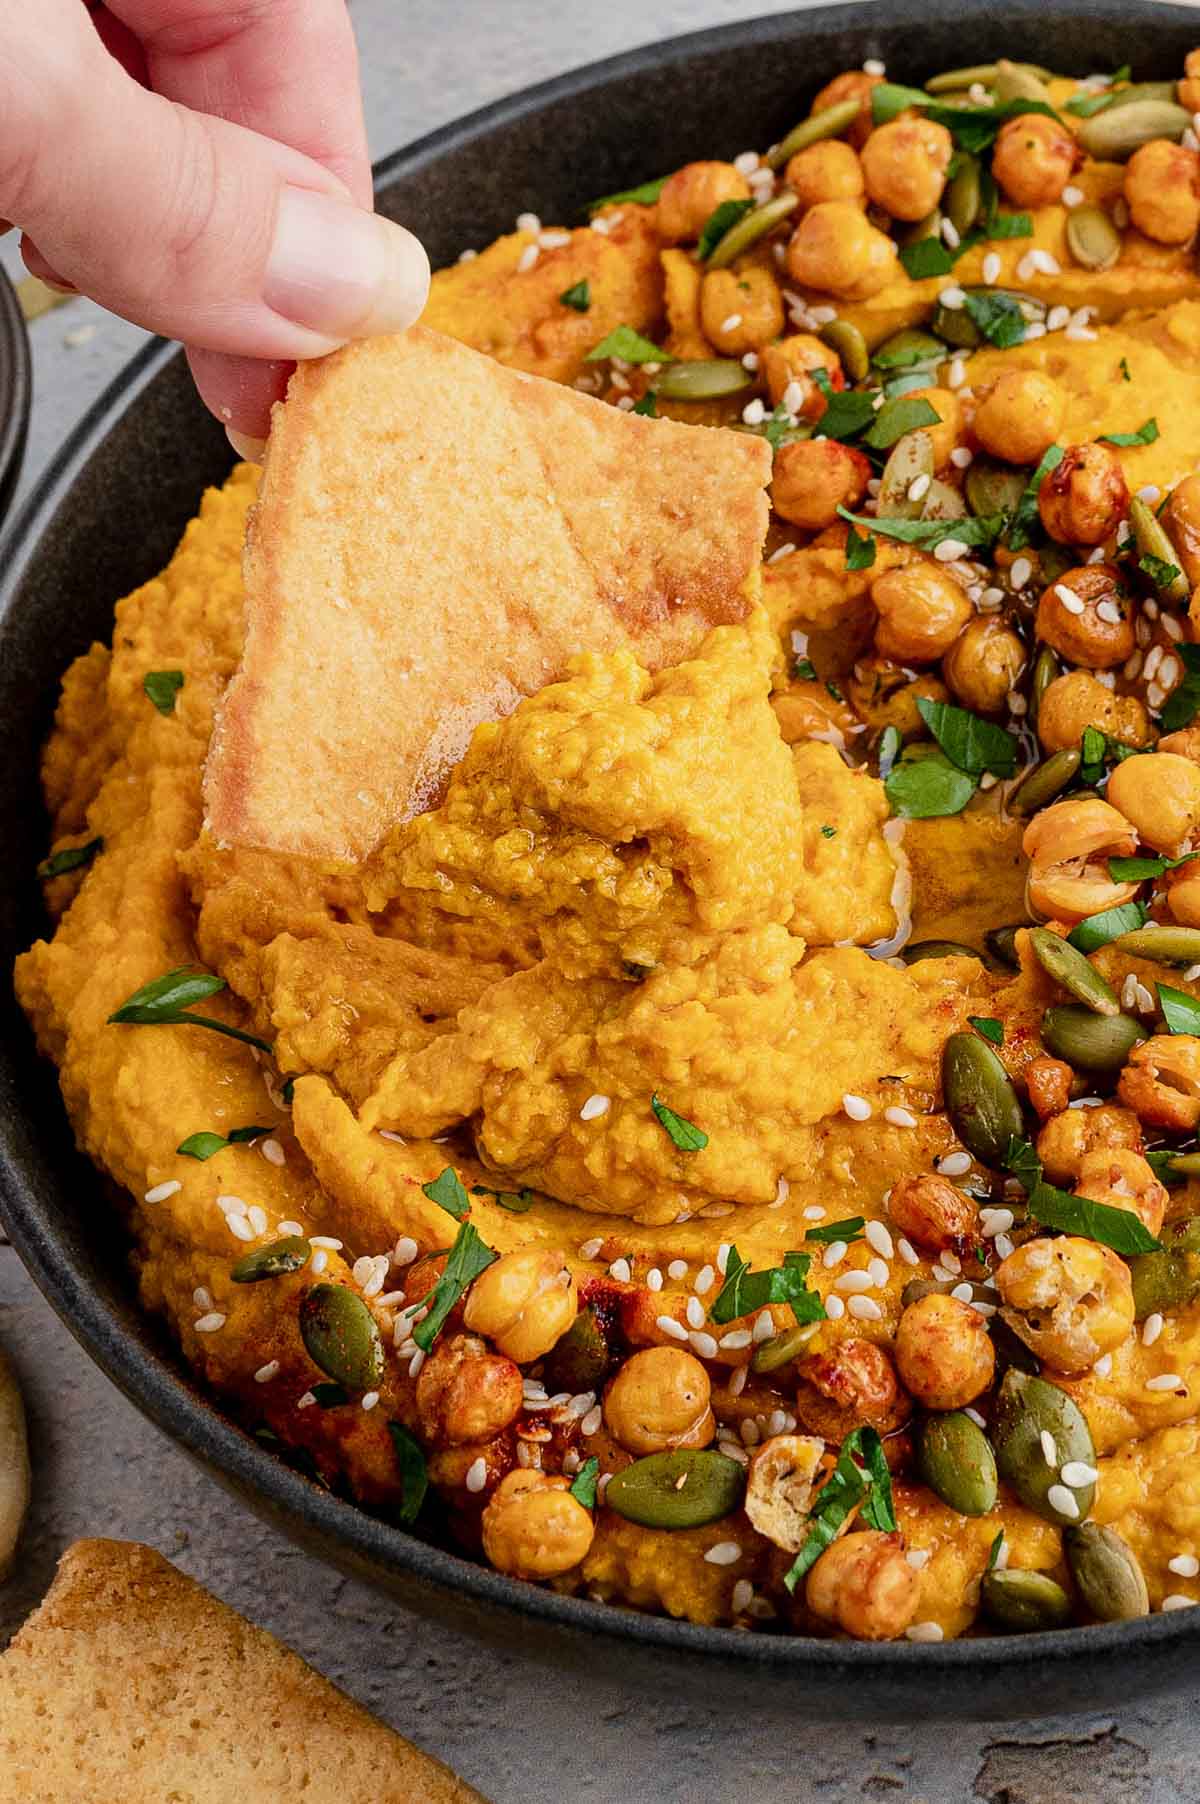 Pumpkin hummus with chickpeas, parsley and a pita chip with a hand.